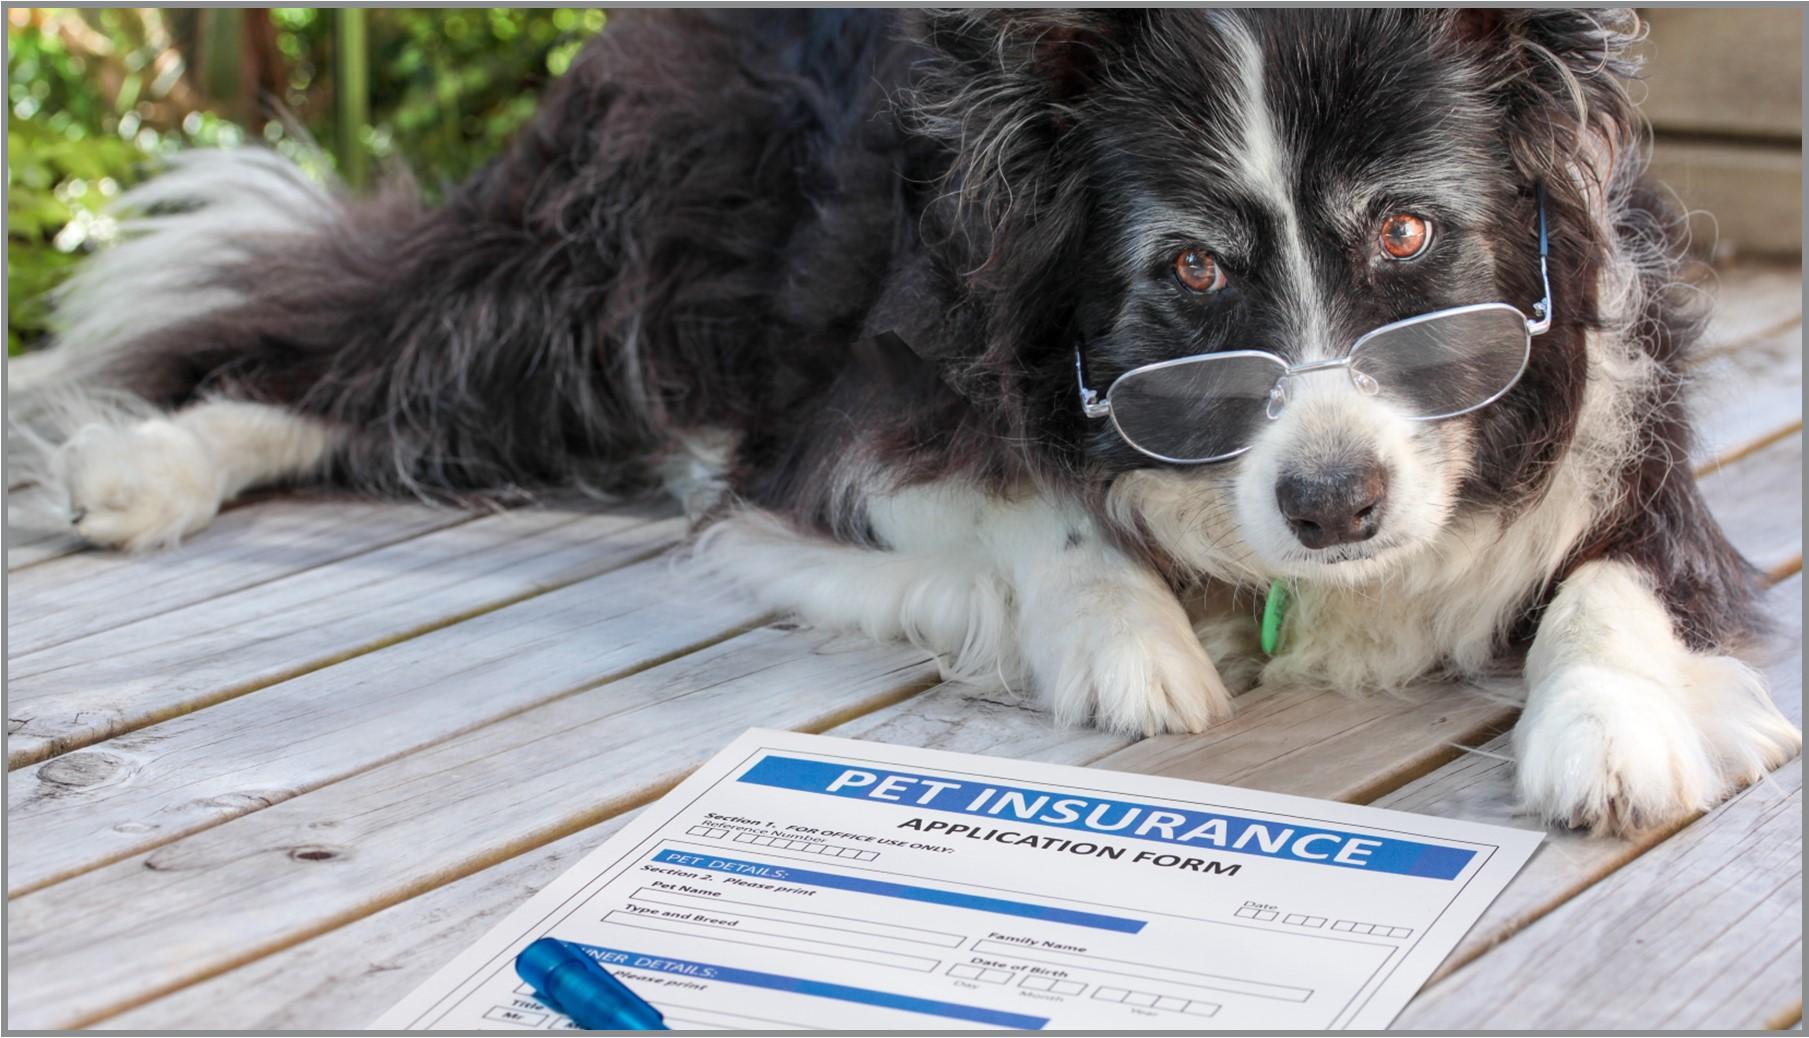 A dog is seen wearing glasses while lying down and filling out an insurance application form.